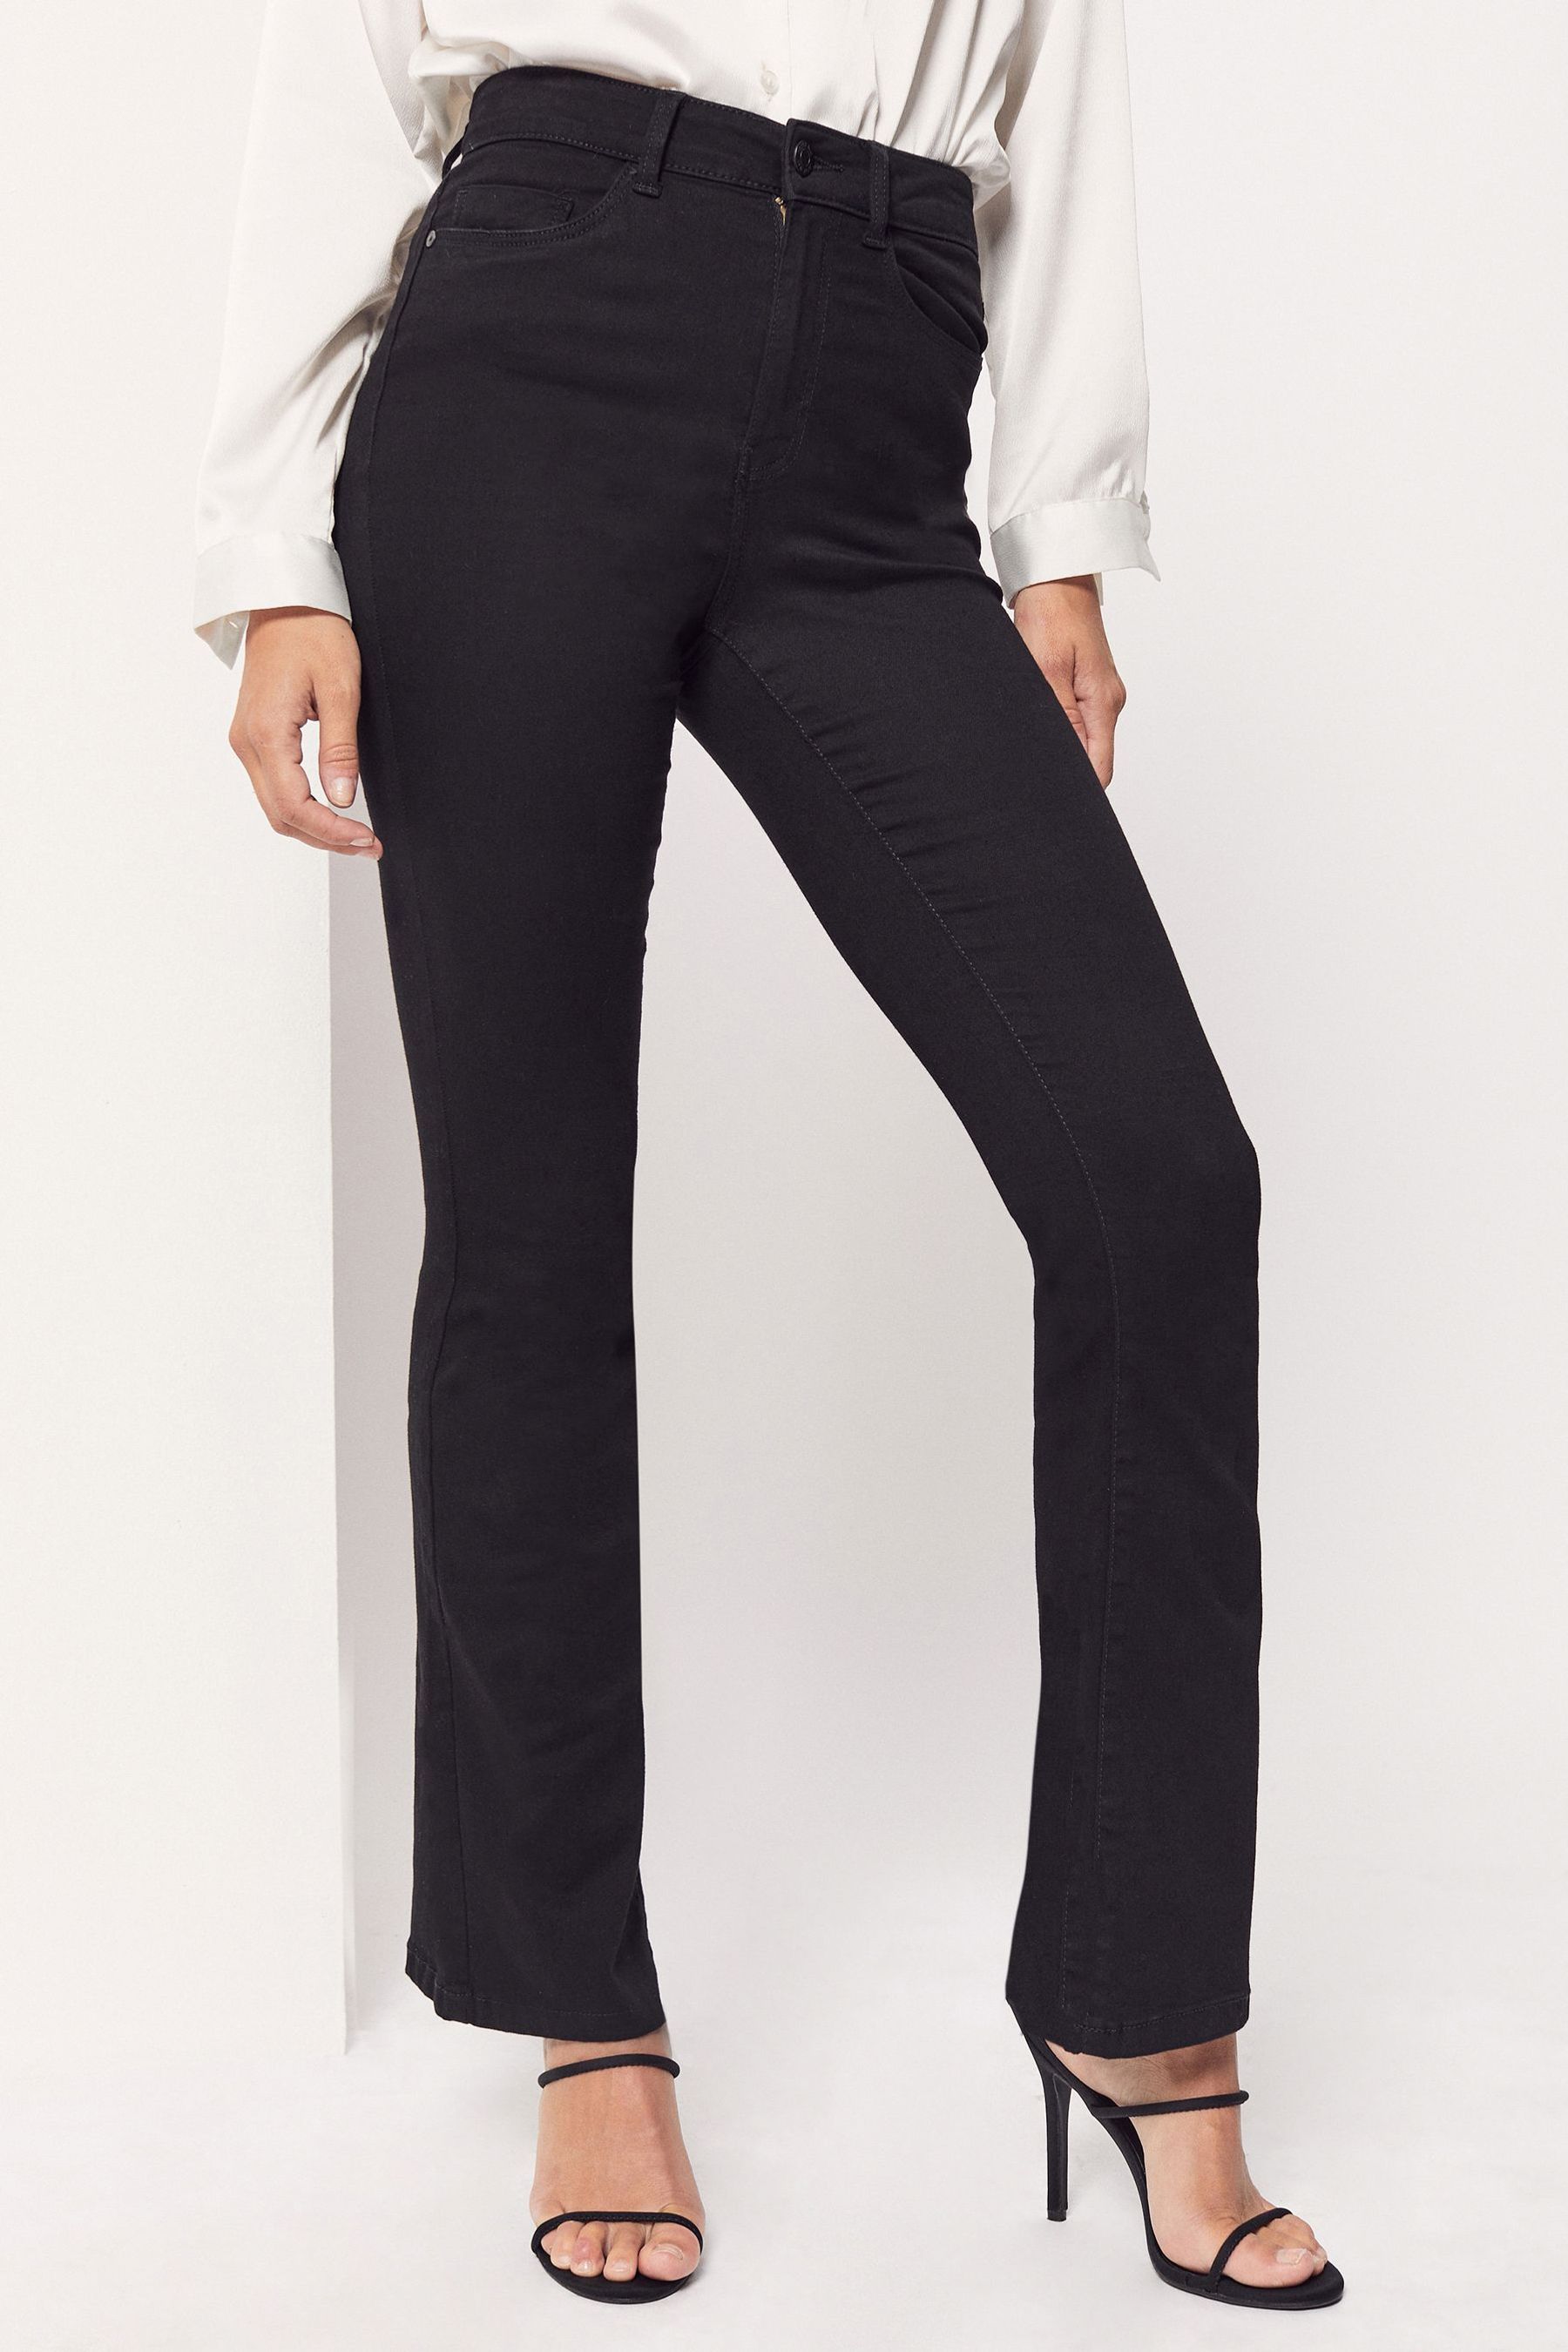 Buy Noisy May Sallie High Waist Flare Jeans from the Next UK online shop